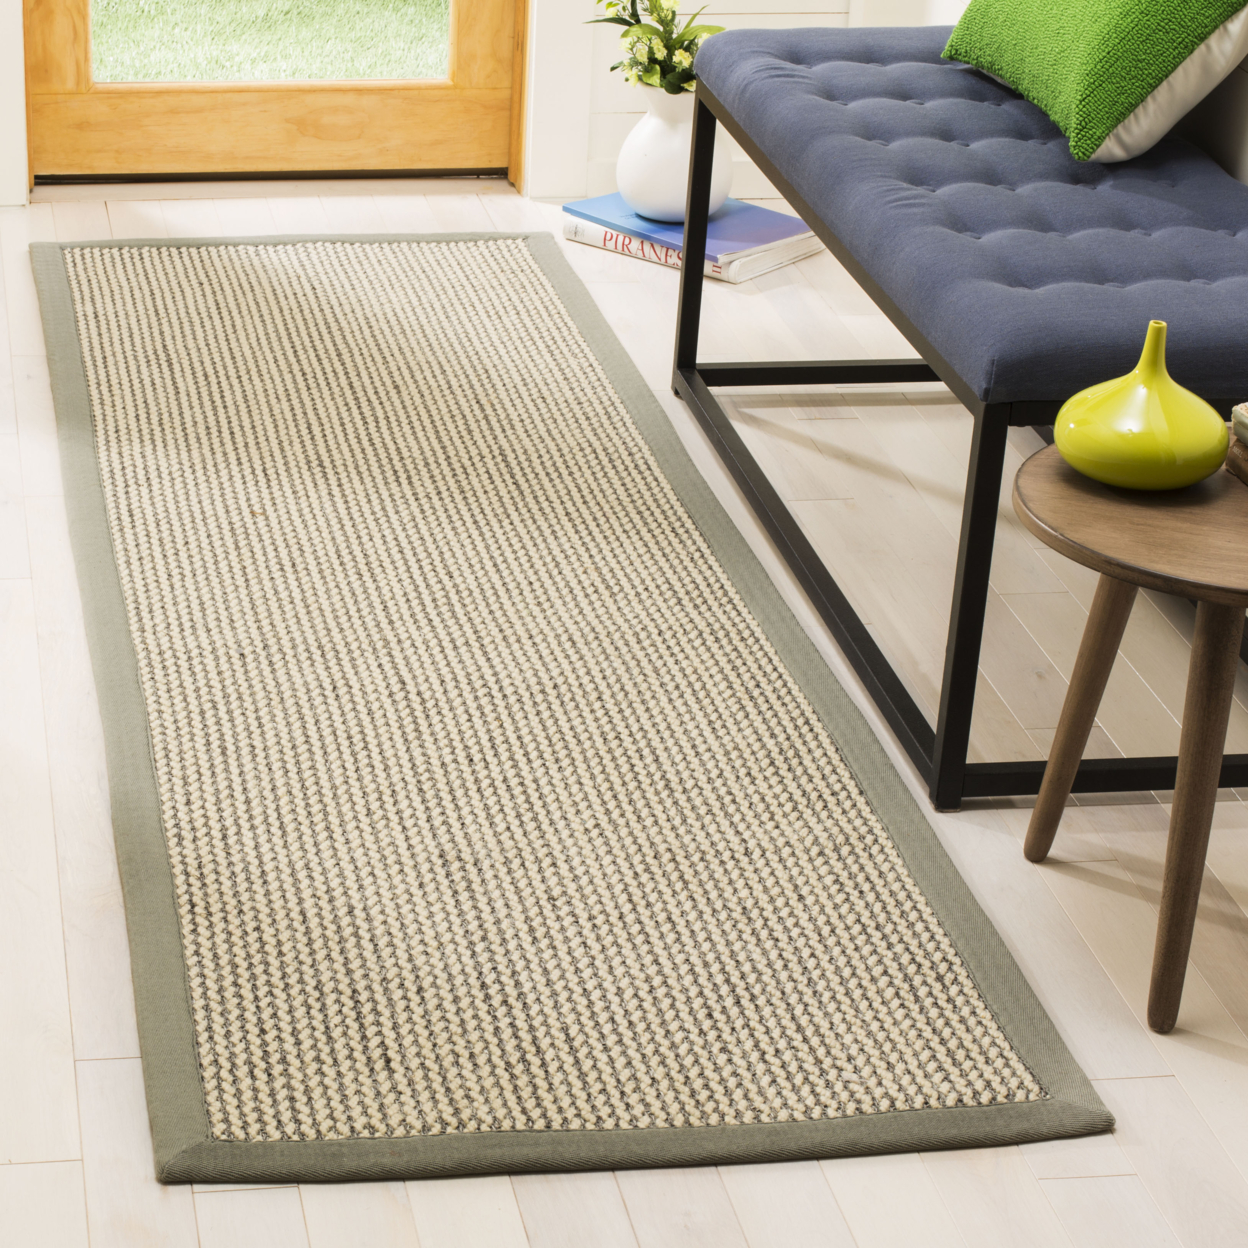 SAFAVIEH Natural Fiber Collection NF475A Grey Rug - 6' Square